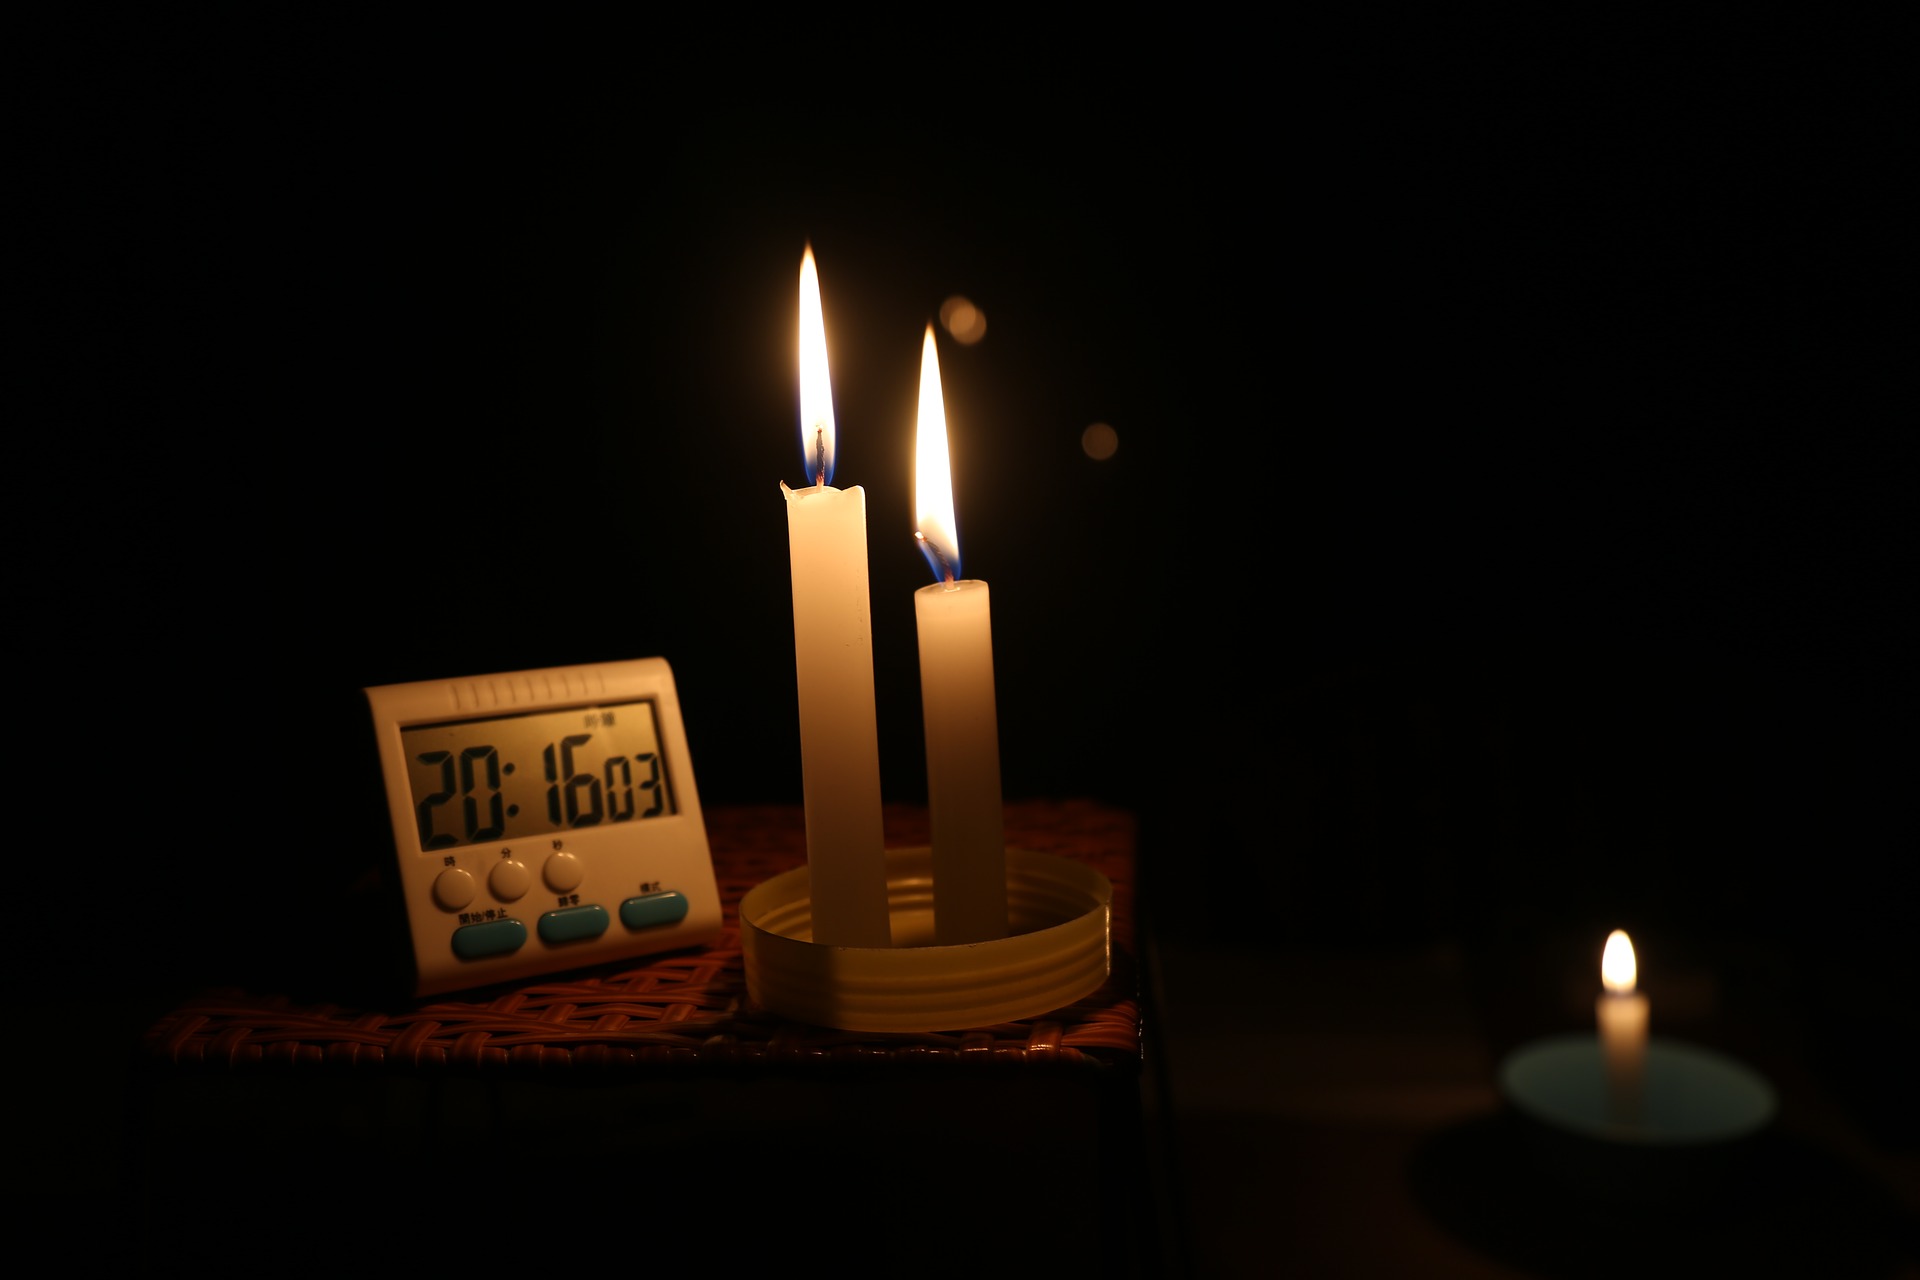 Two emergency candles are lit together on a wicker basket in a pitch-black room. A timer sits on the wicker basket near the candles, with the time set to 20 minutes and 16 seconds.